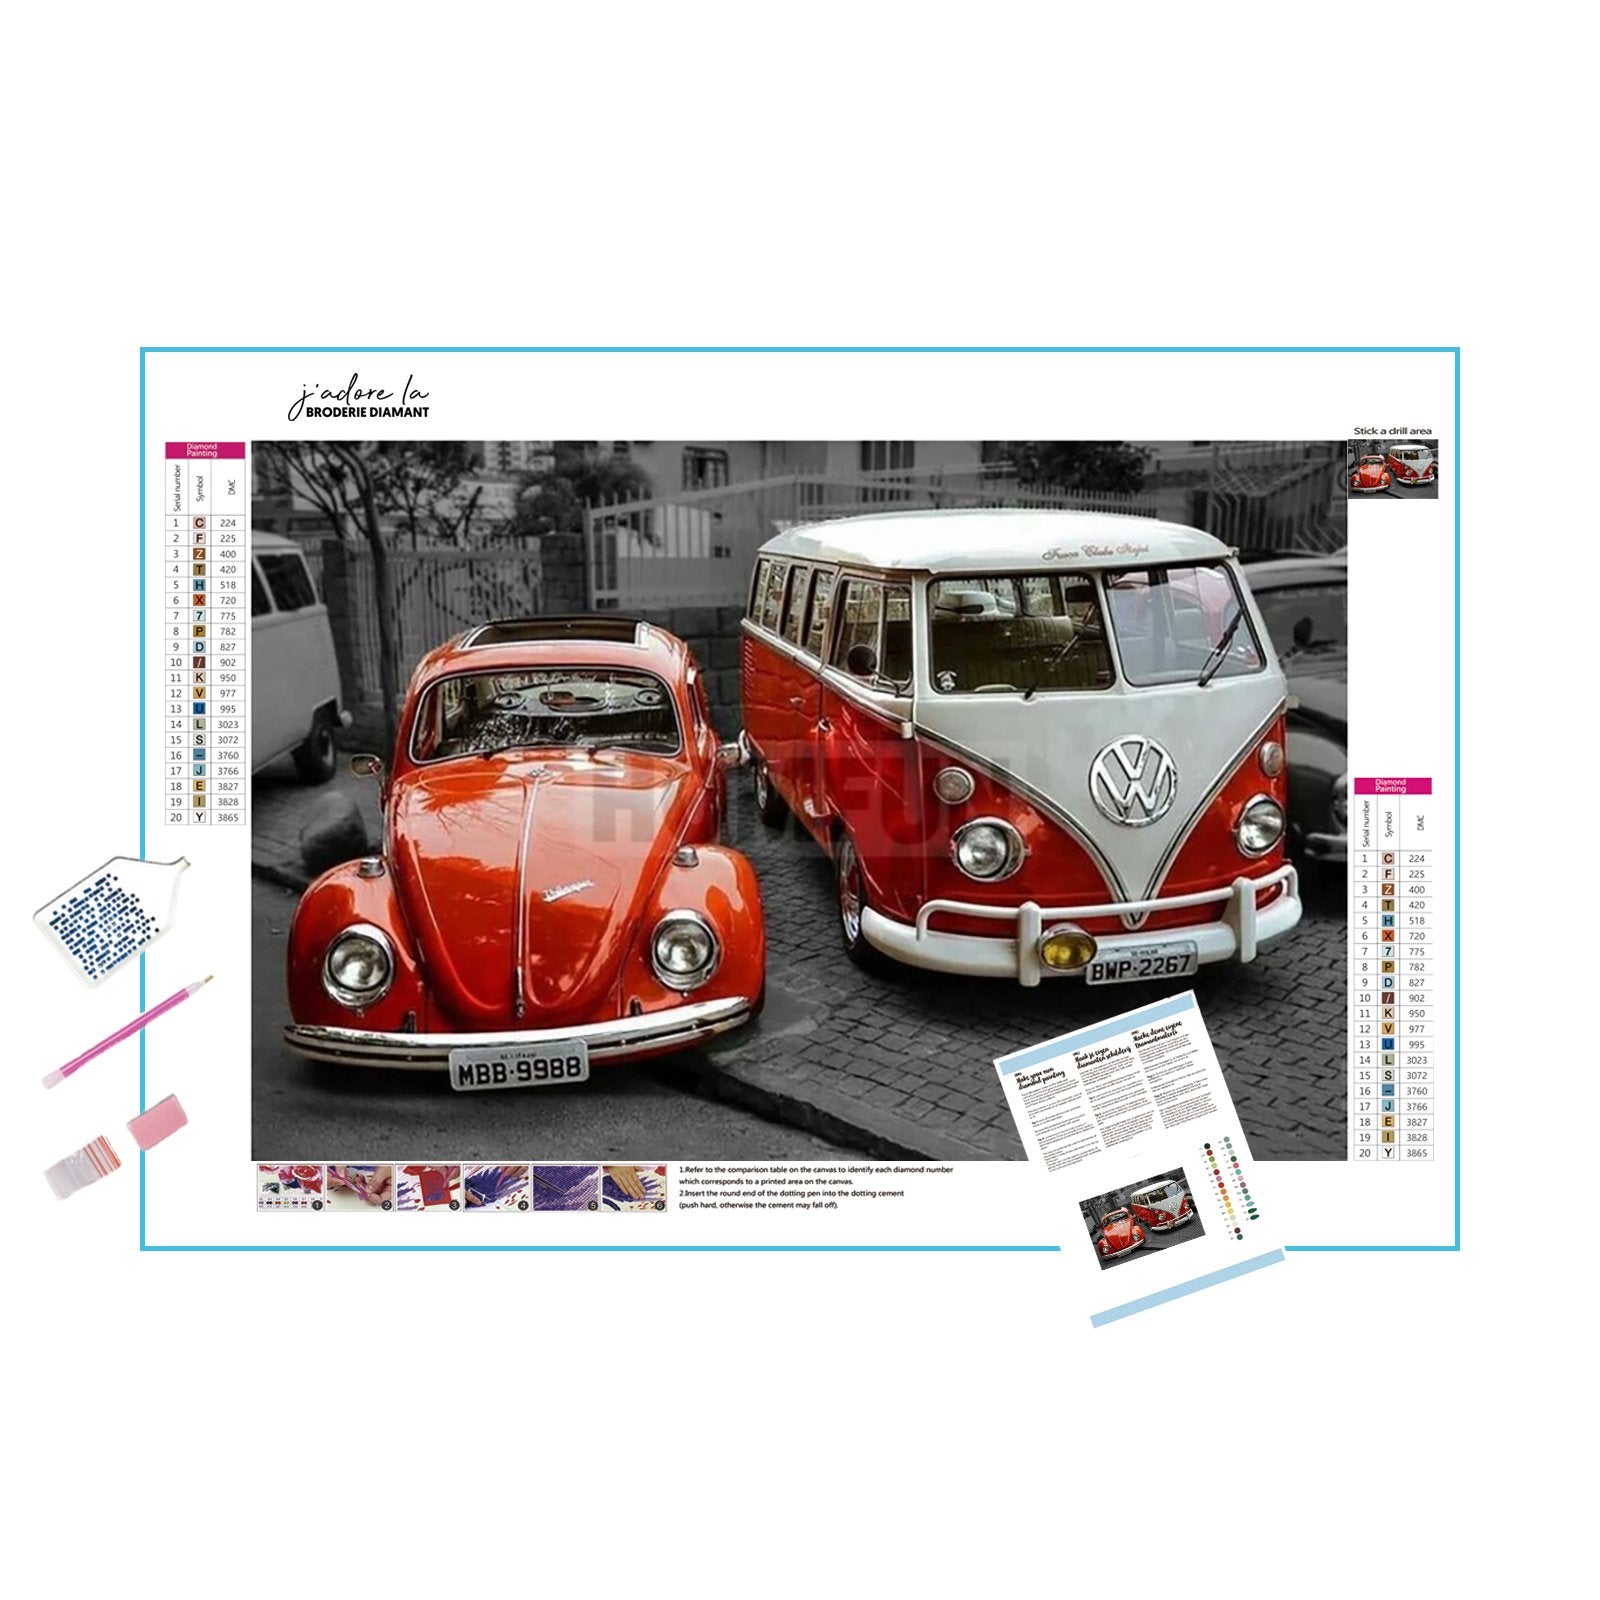 Journey back in time with a classic scene, capturing nostalgic city life.Red Car And Bus - Diamondartlove